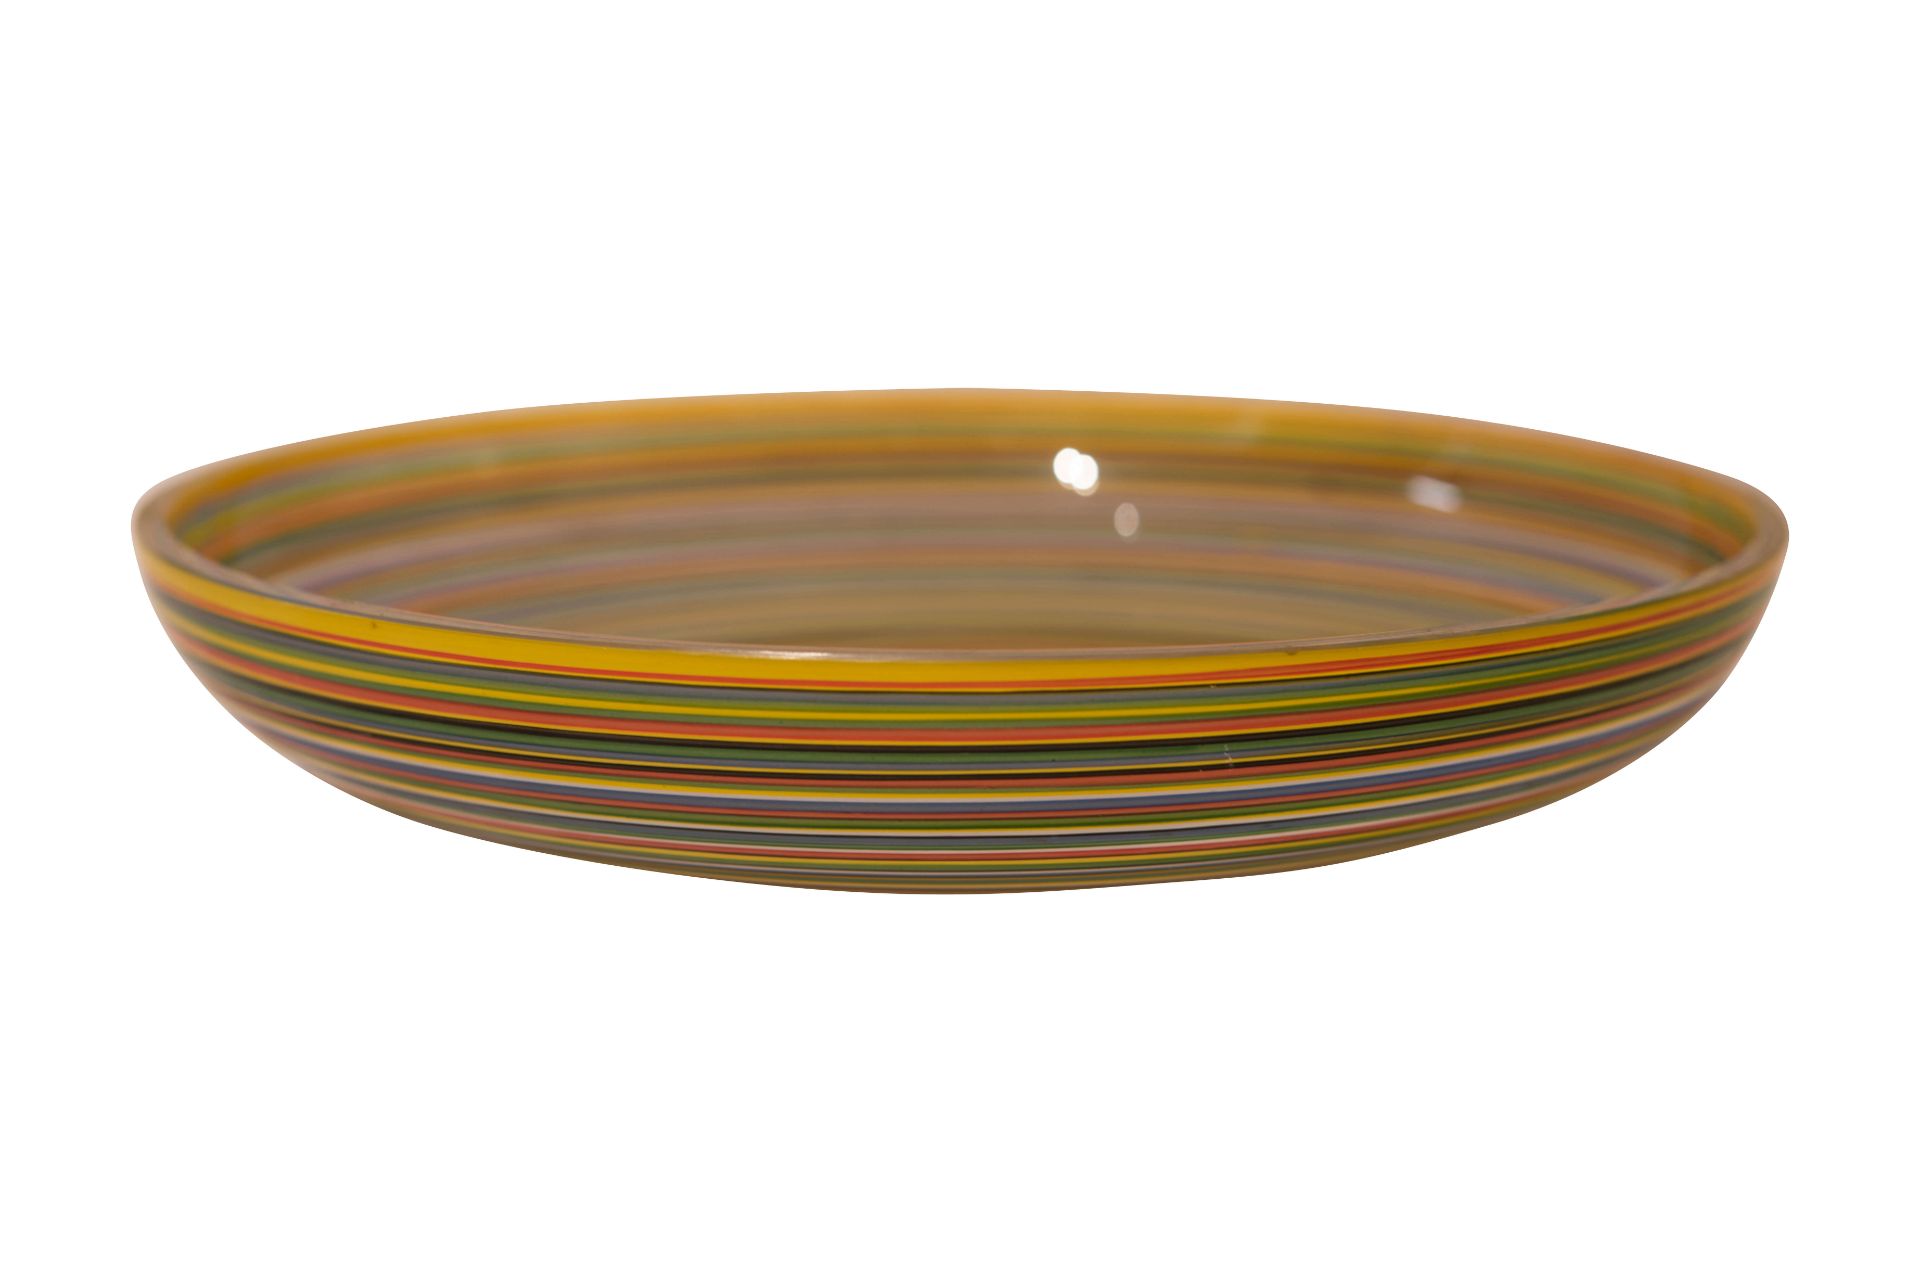 Glas Schale bunt bemalt | Glass Bowl Painted with Colorful Circles - Image 5 of 5